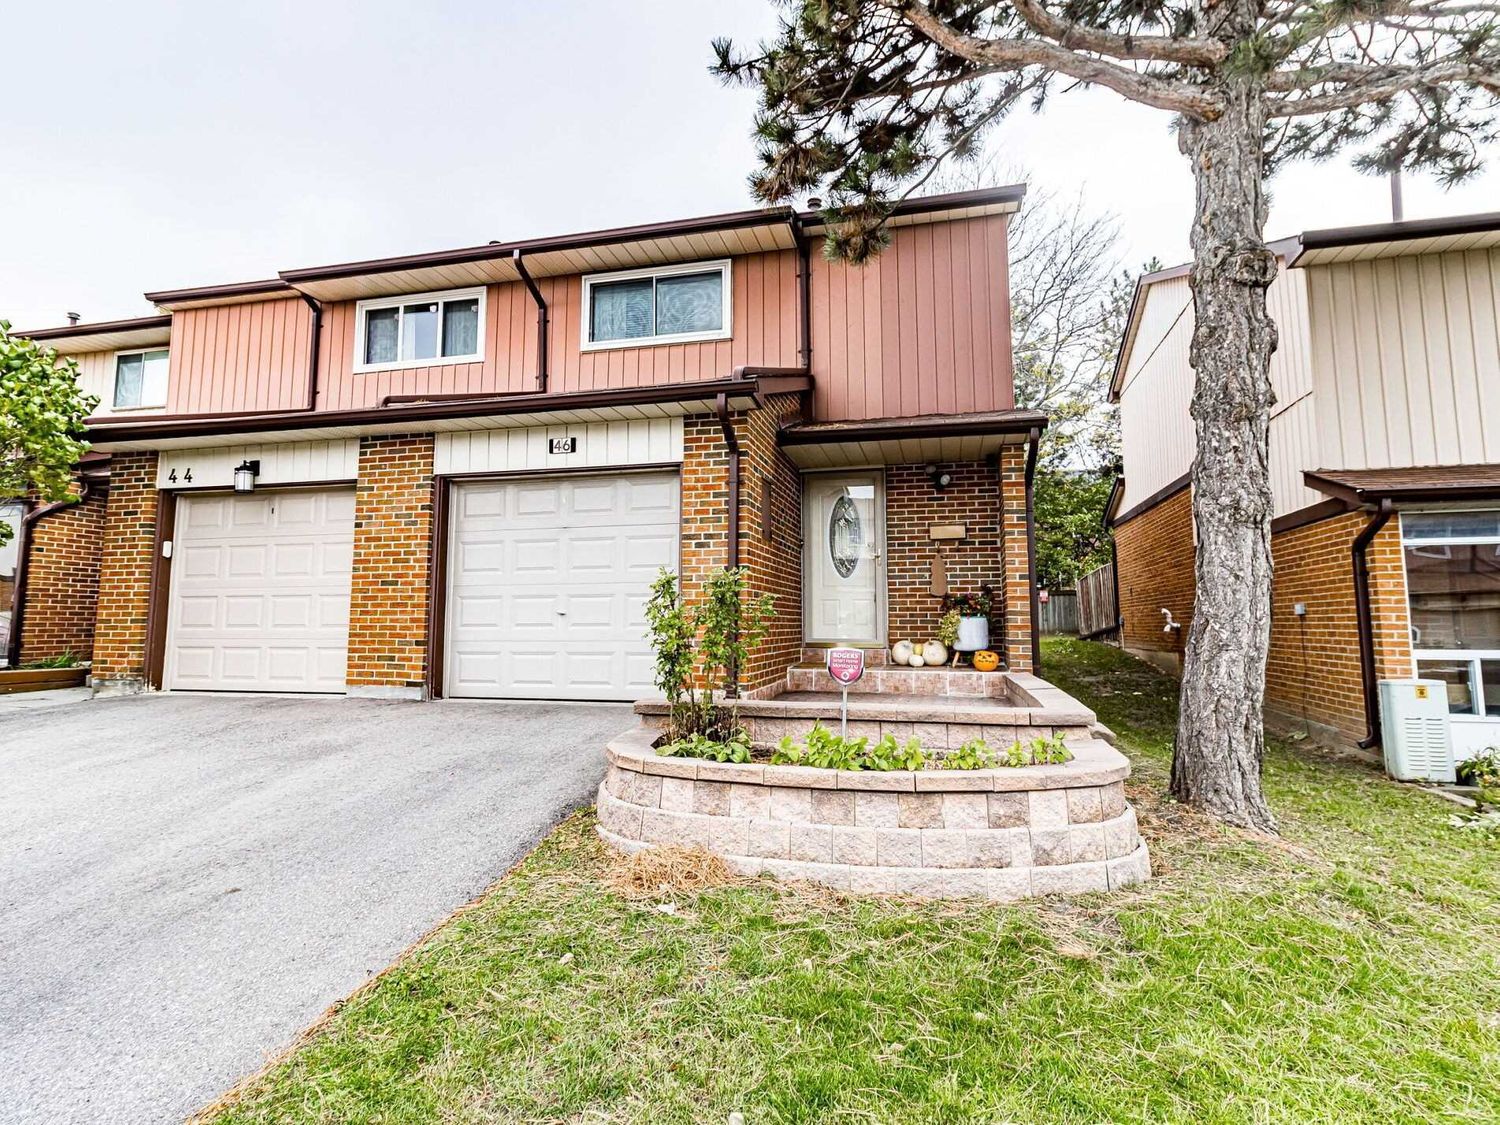 30 Dundalk Drive. 30 Dundalk Drive Townhomes is located in  Scarborough, Toronto - image #2 of 2